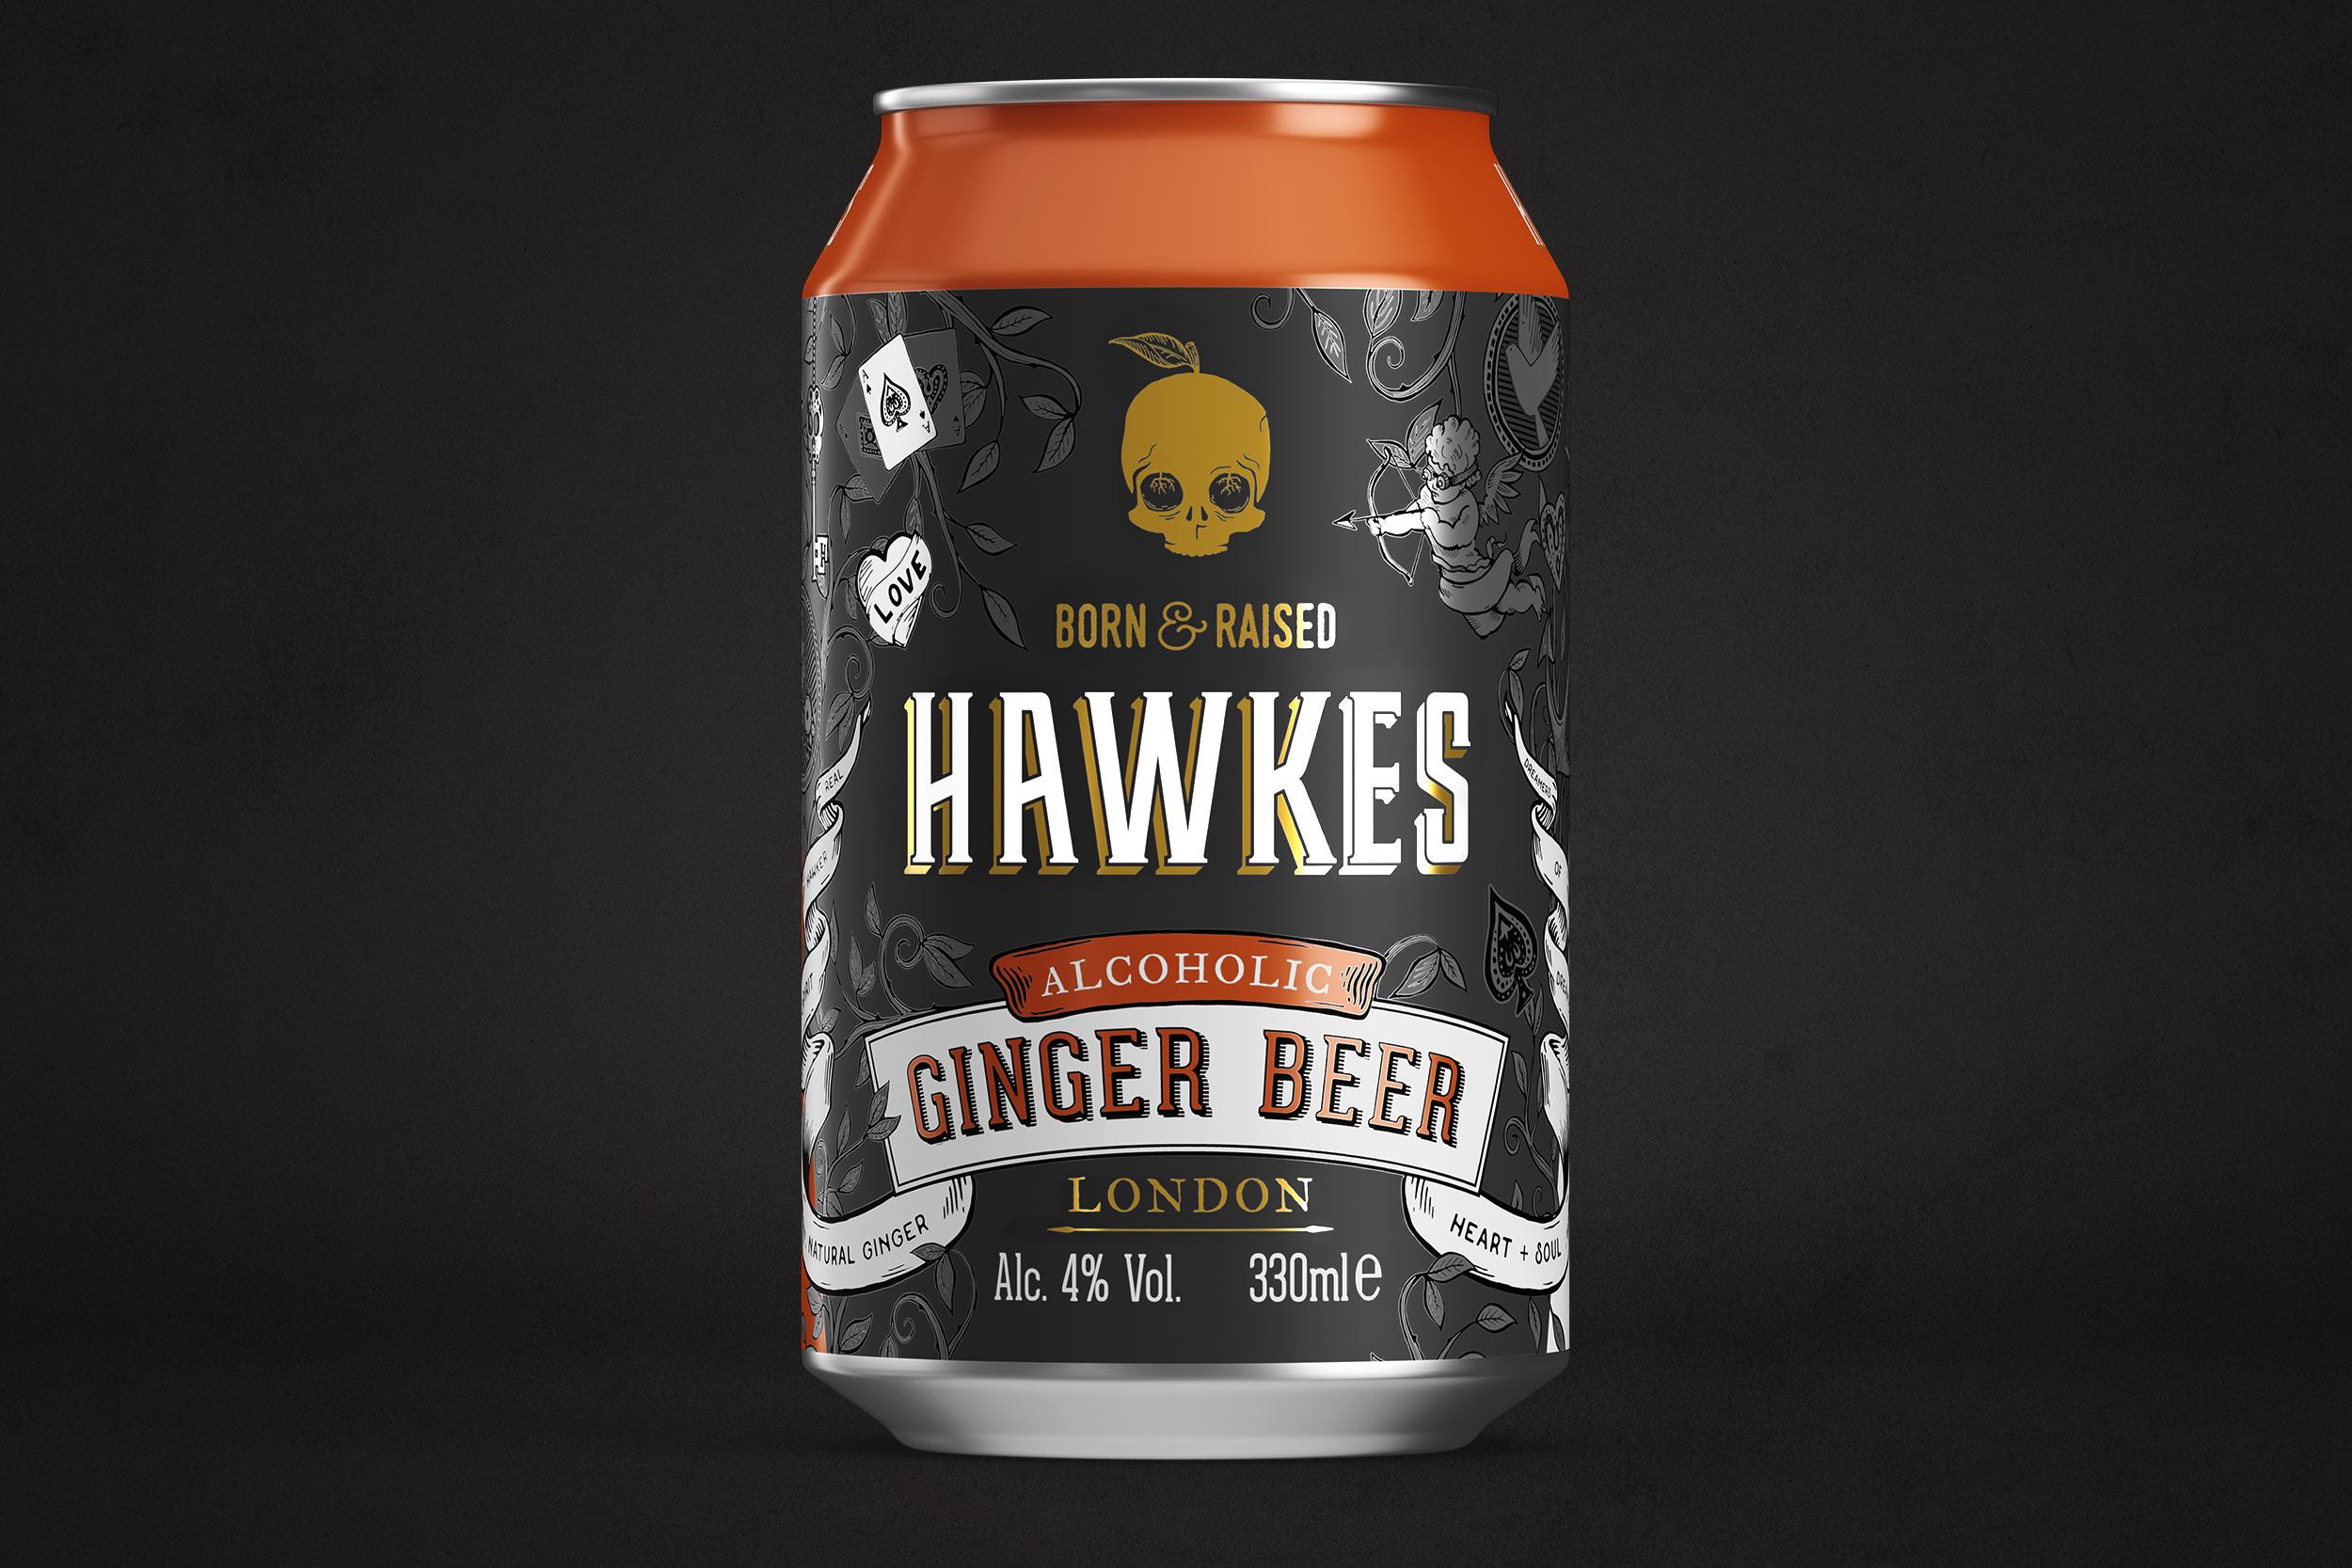 Beer Can Logo - Hawkes Logo Brand Design Ginger Beer can 1 - Kingdom & Sparrow